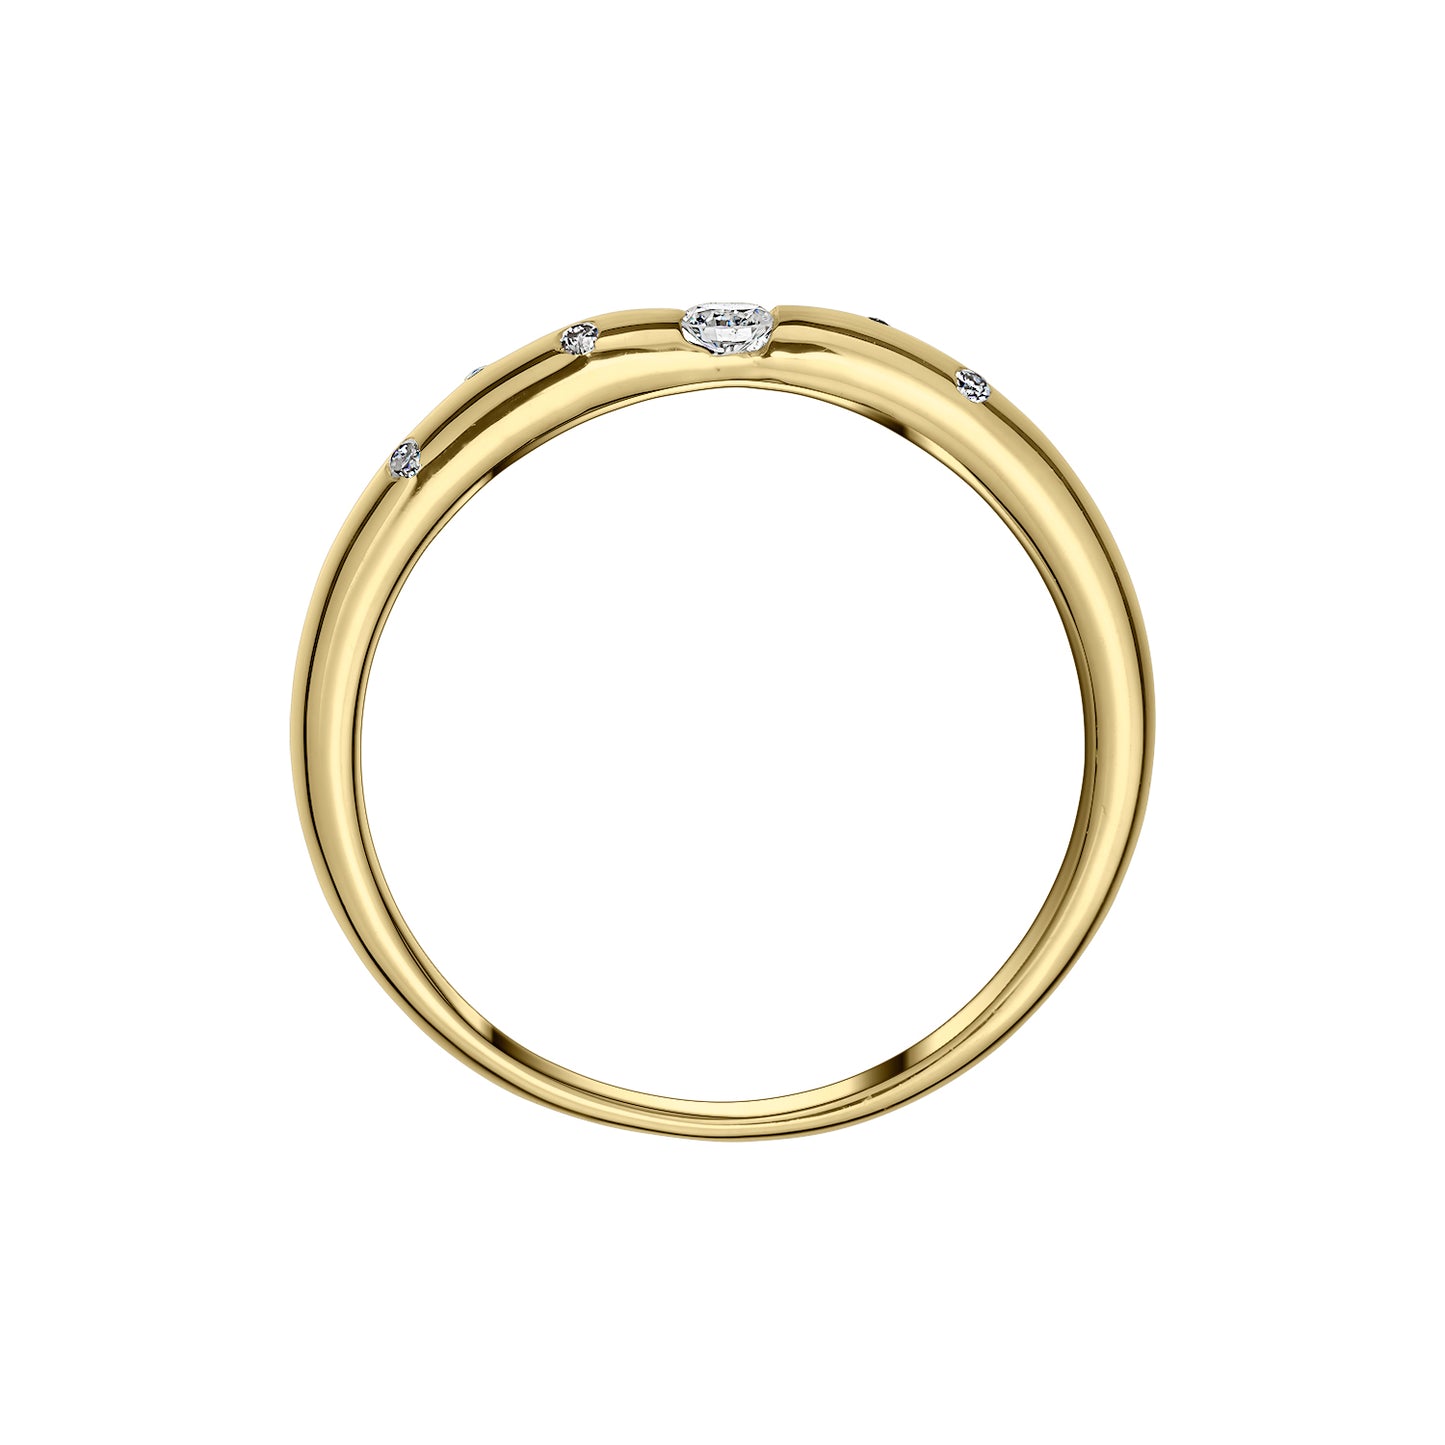 Gold Ring 14K (585) Caprice with Diamonds 0.10 ct - Gold